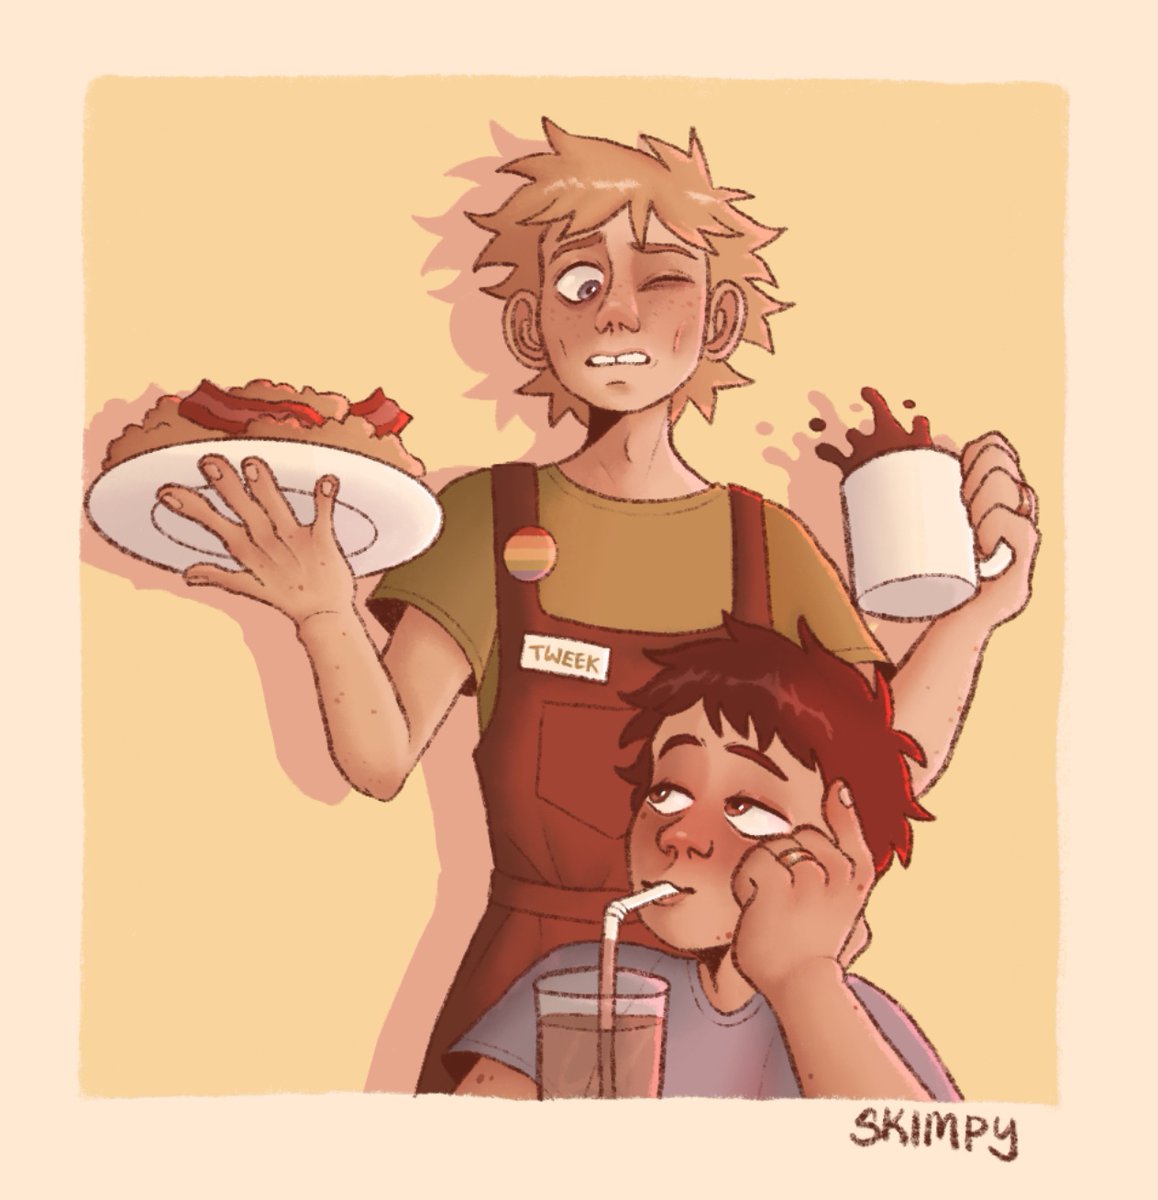 Craig coming to Tweek’s café to distract his husband at work ☕️🚀
#SouthPark #southparkfanart #SouthParkPostCovid #southparkart #tweekxcraig #TweekTweak #tweektweak #craigtucker #CraigTucker #spcreek #HappyPride2023